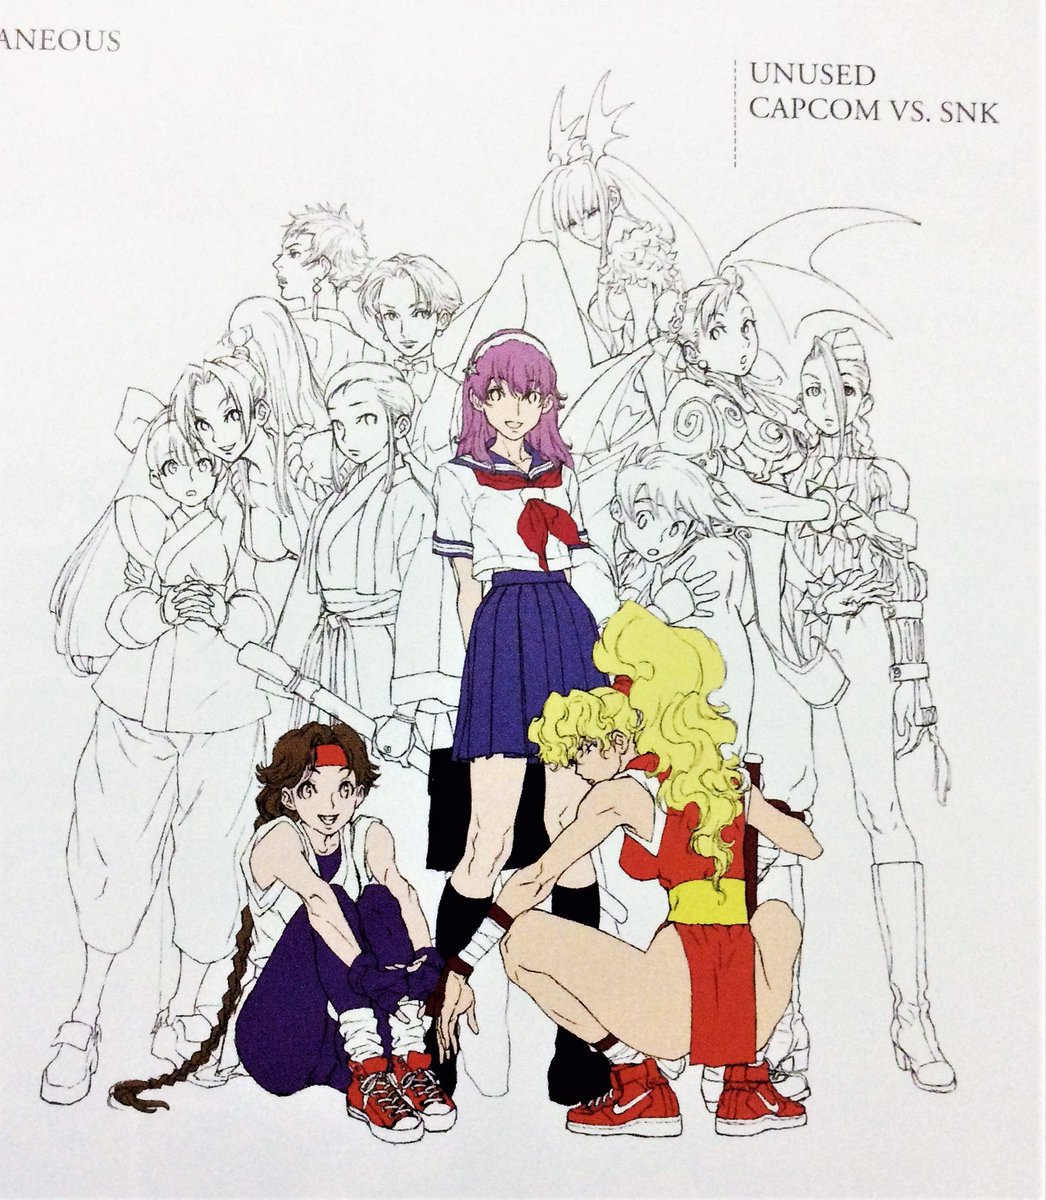 9. Crossovers. This includes all of the Artwork for games where Darkstalkers characters appeared outside of their own series, such as Capcom vs SNK, Millenium Fight and MvC.